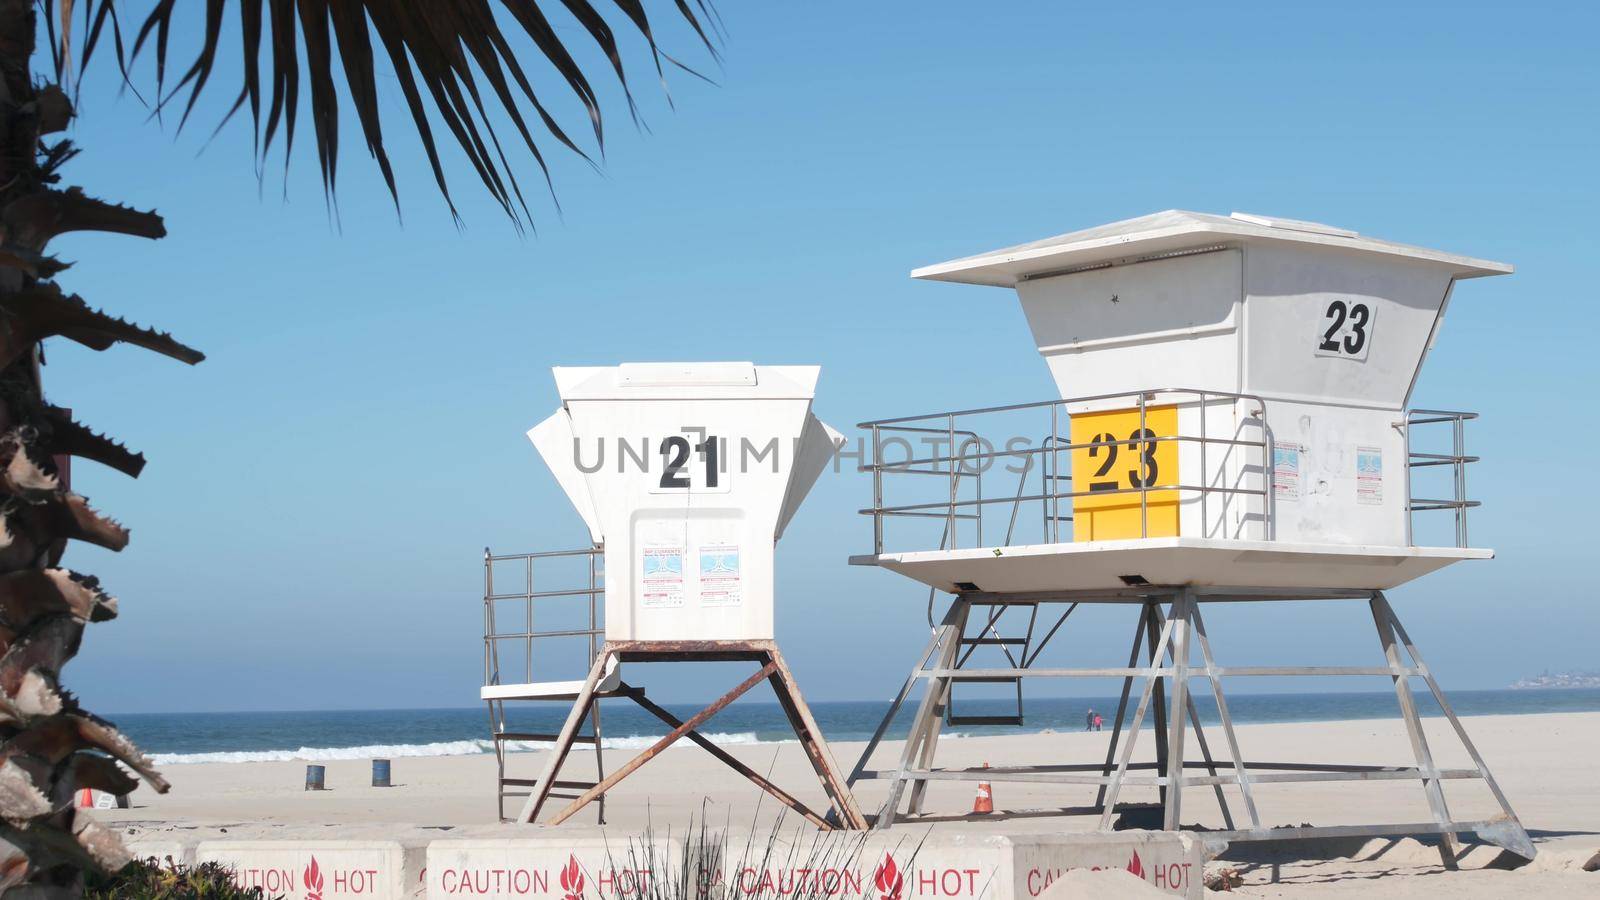 Lifeguard stand and palm tree, life guard tower for surfing on California beach. by DogoraSun